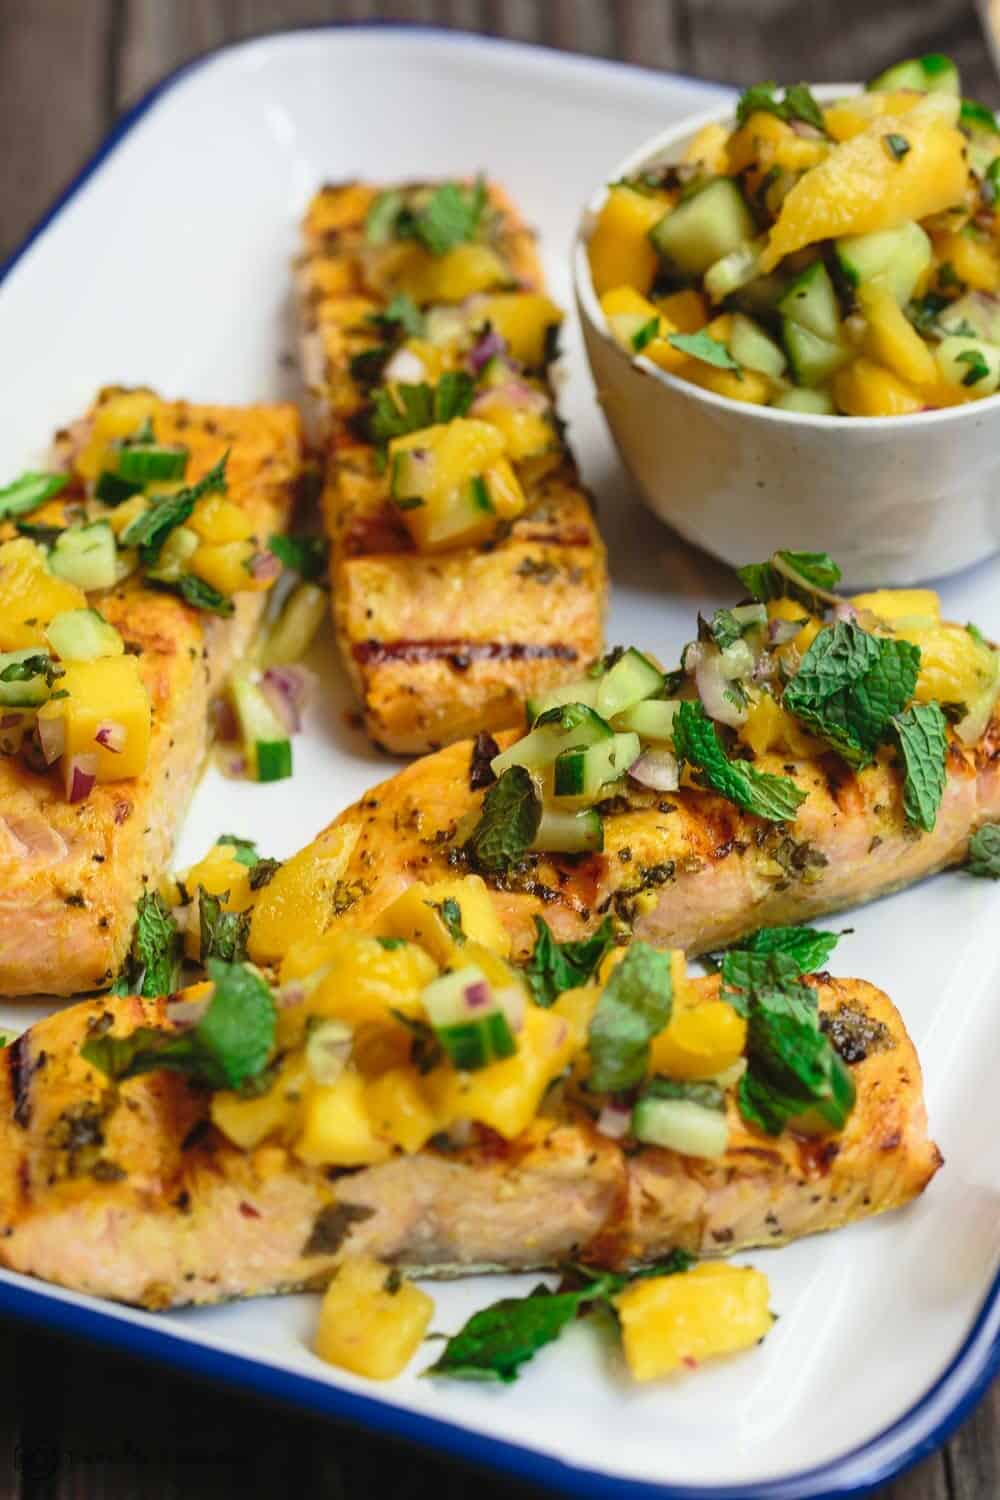 Best Grilled Salmon Recipe with Mango Salsa The